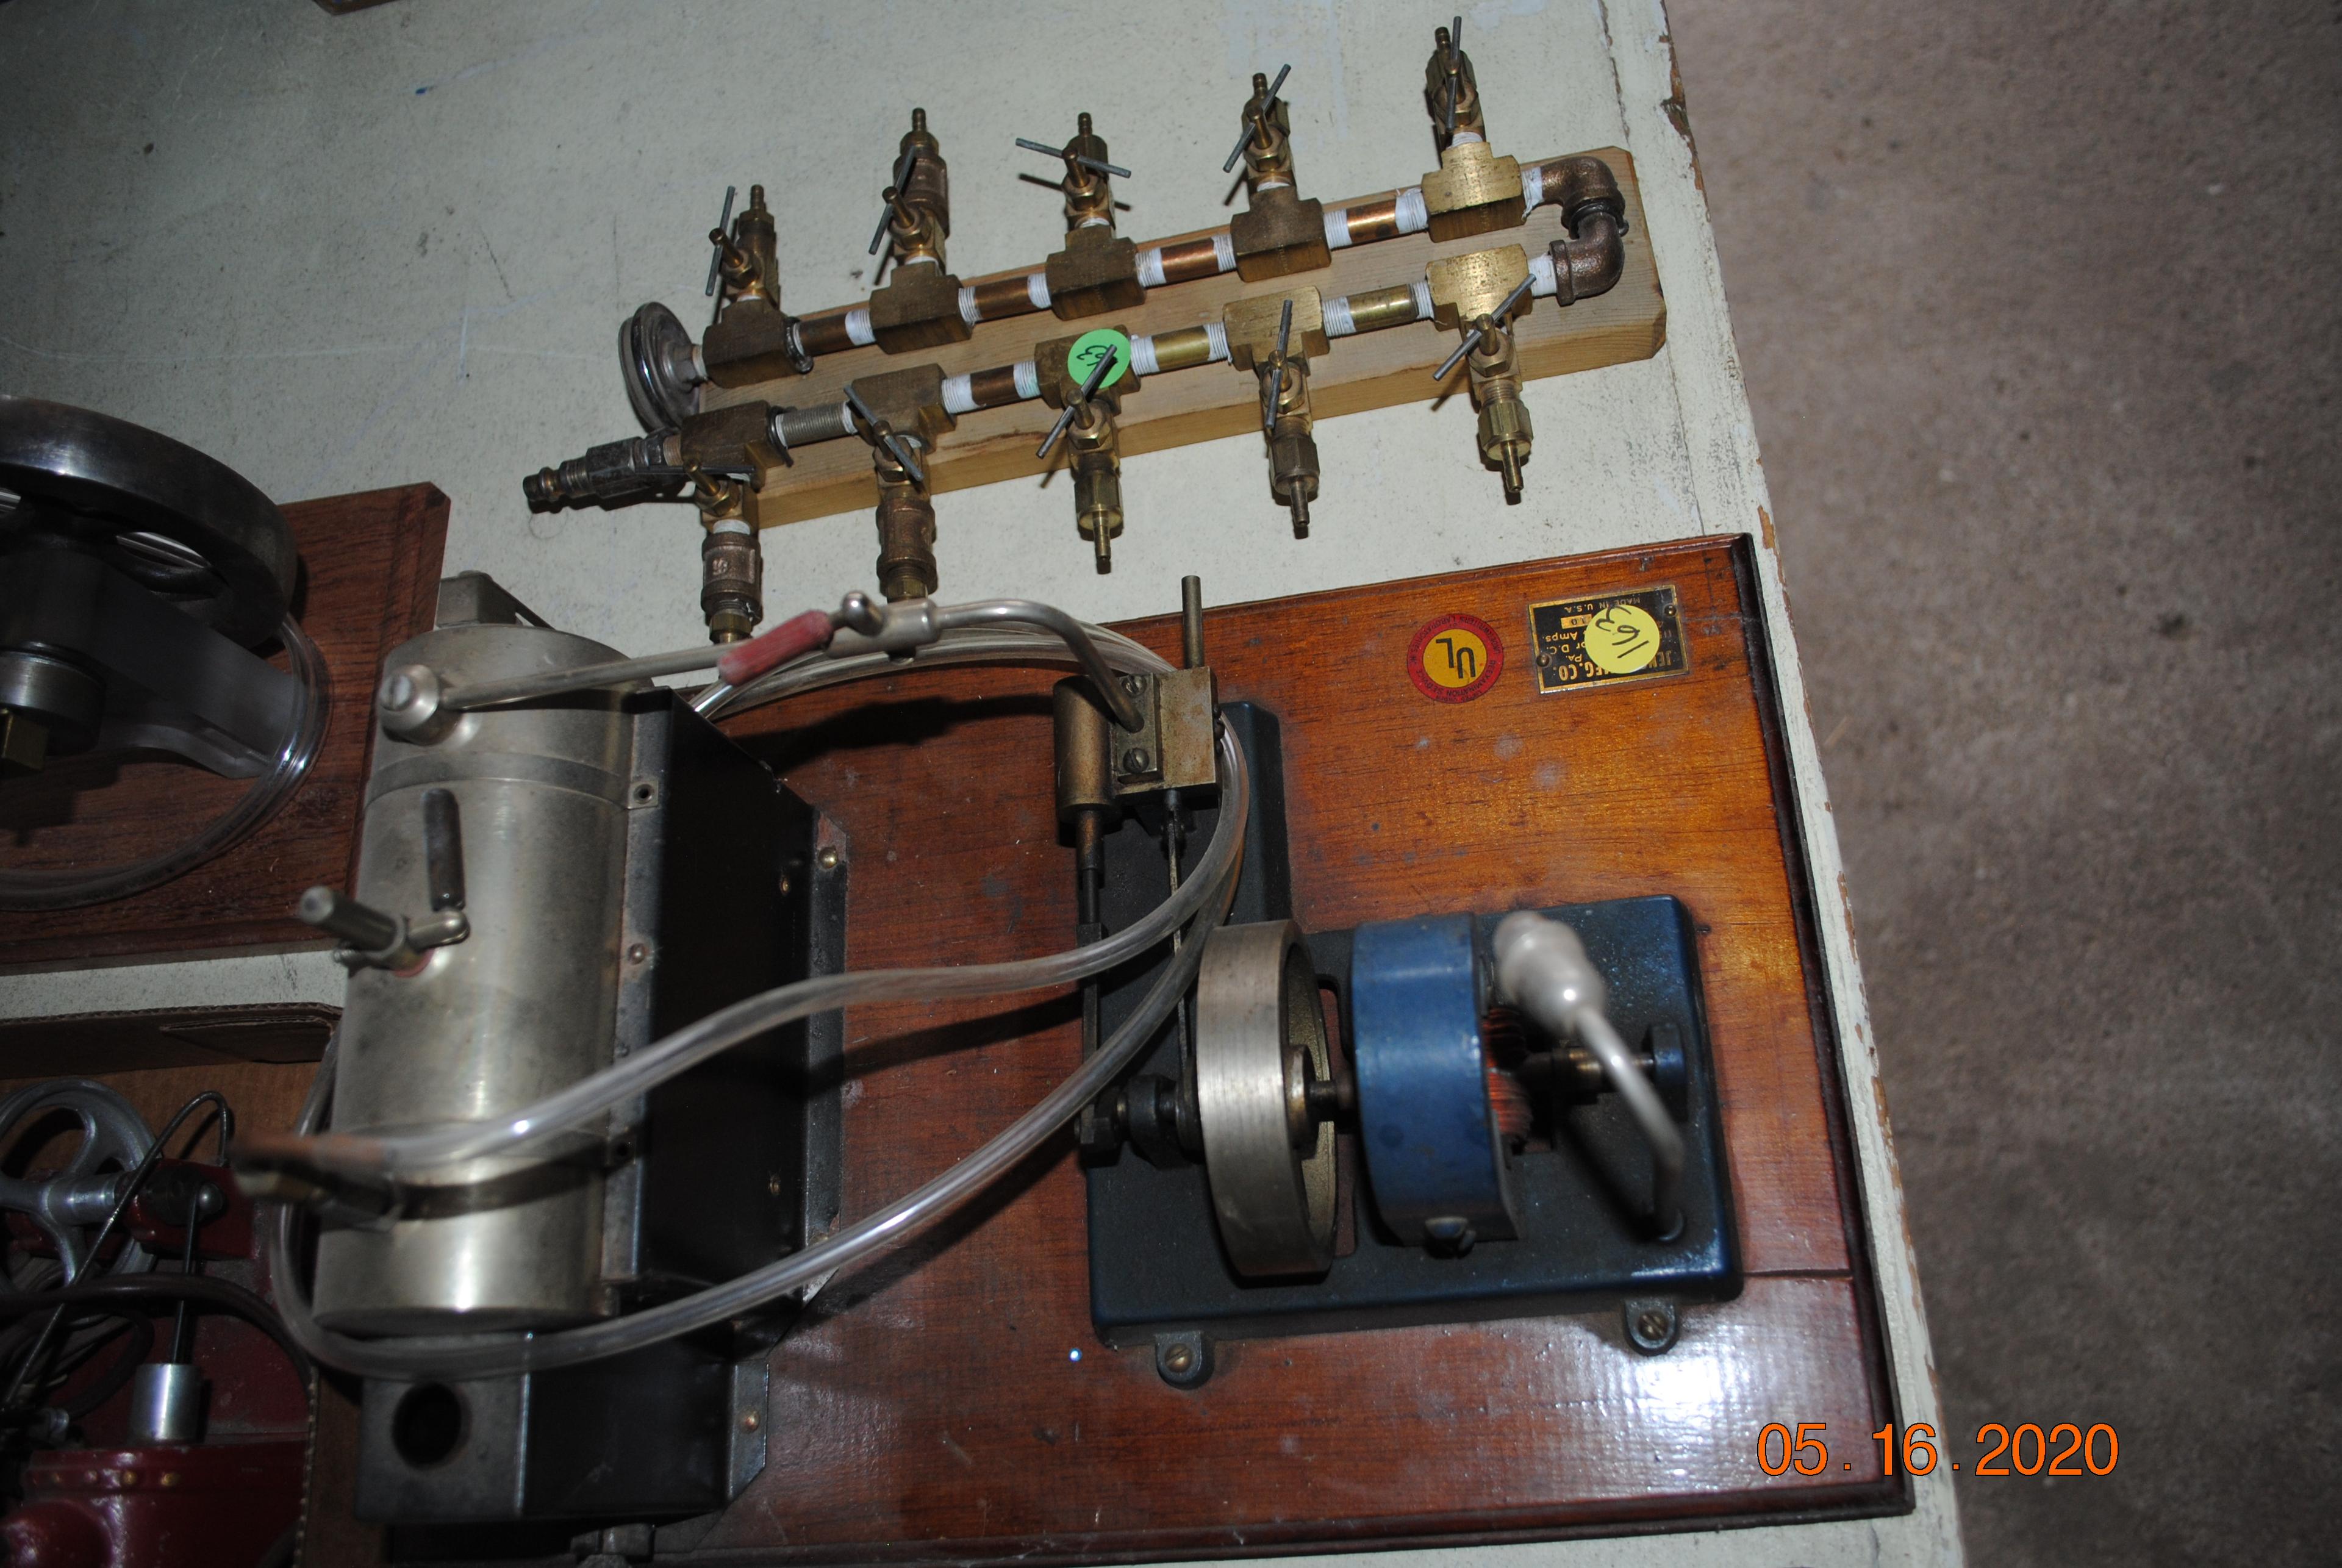 Compressed air steam generator set, owner's son state these were possibly kit sets